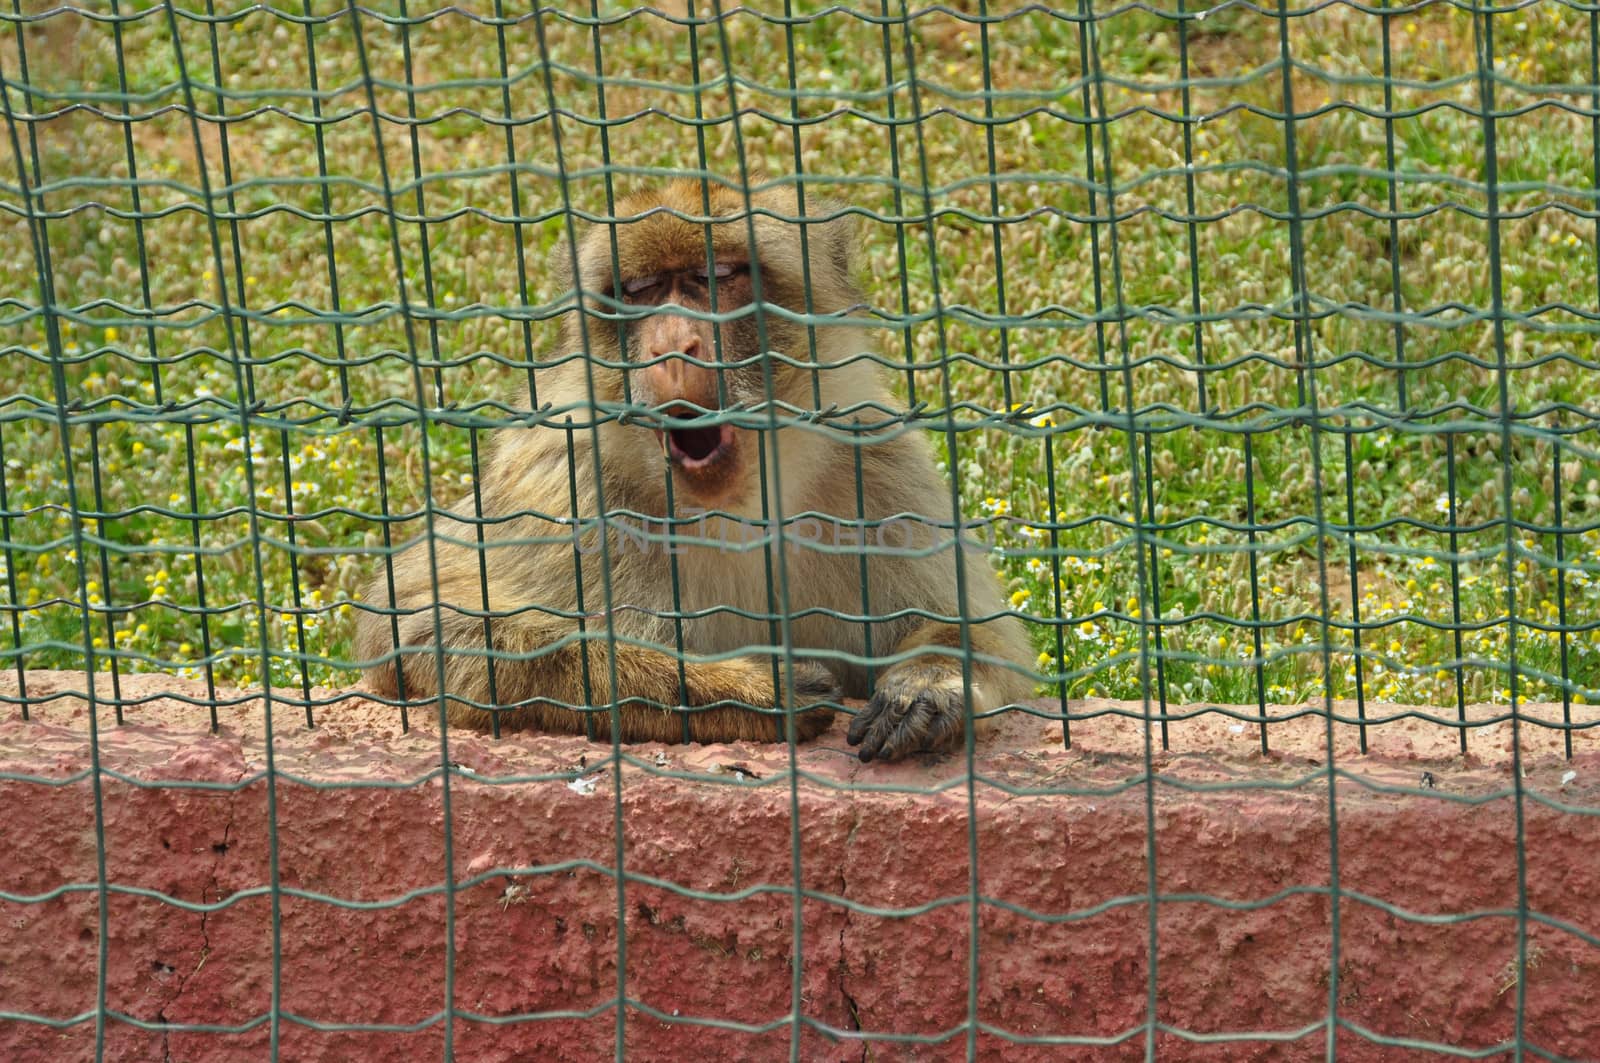 Macaque monkey in captivity. Wild animal at the zoo.